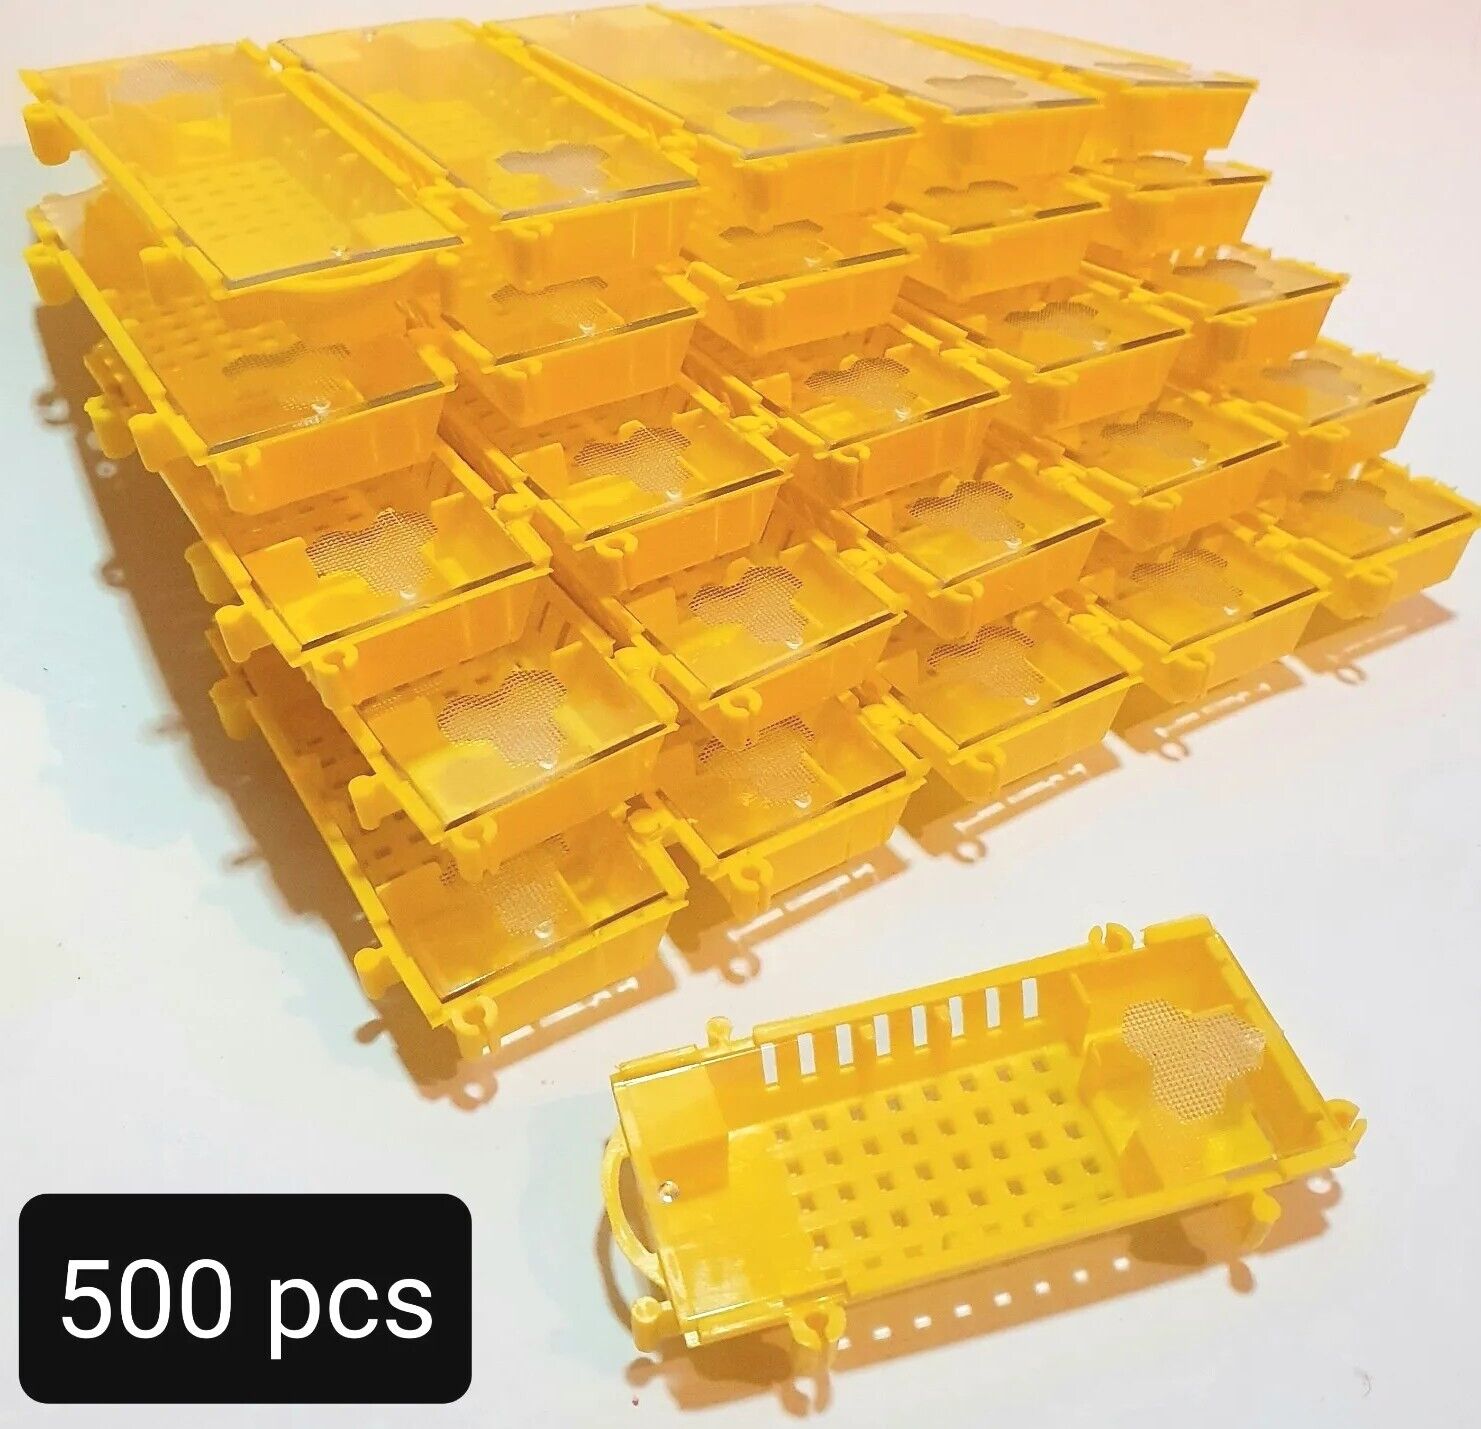 500 pcs Containers for Postal transportation Queen Bees